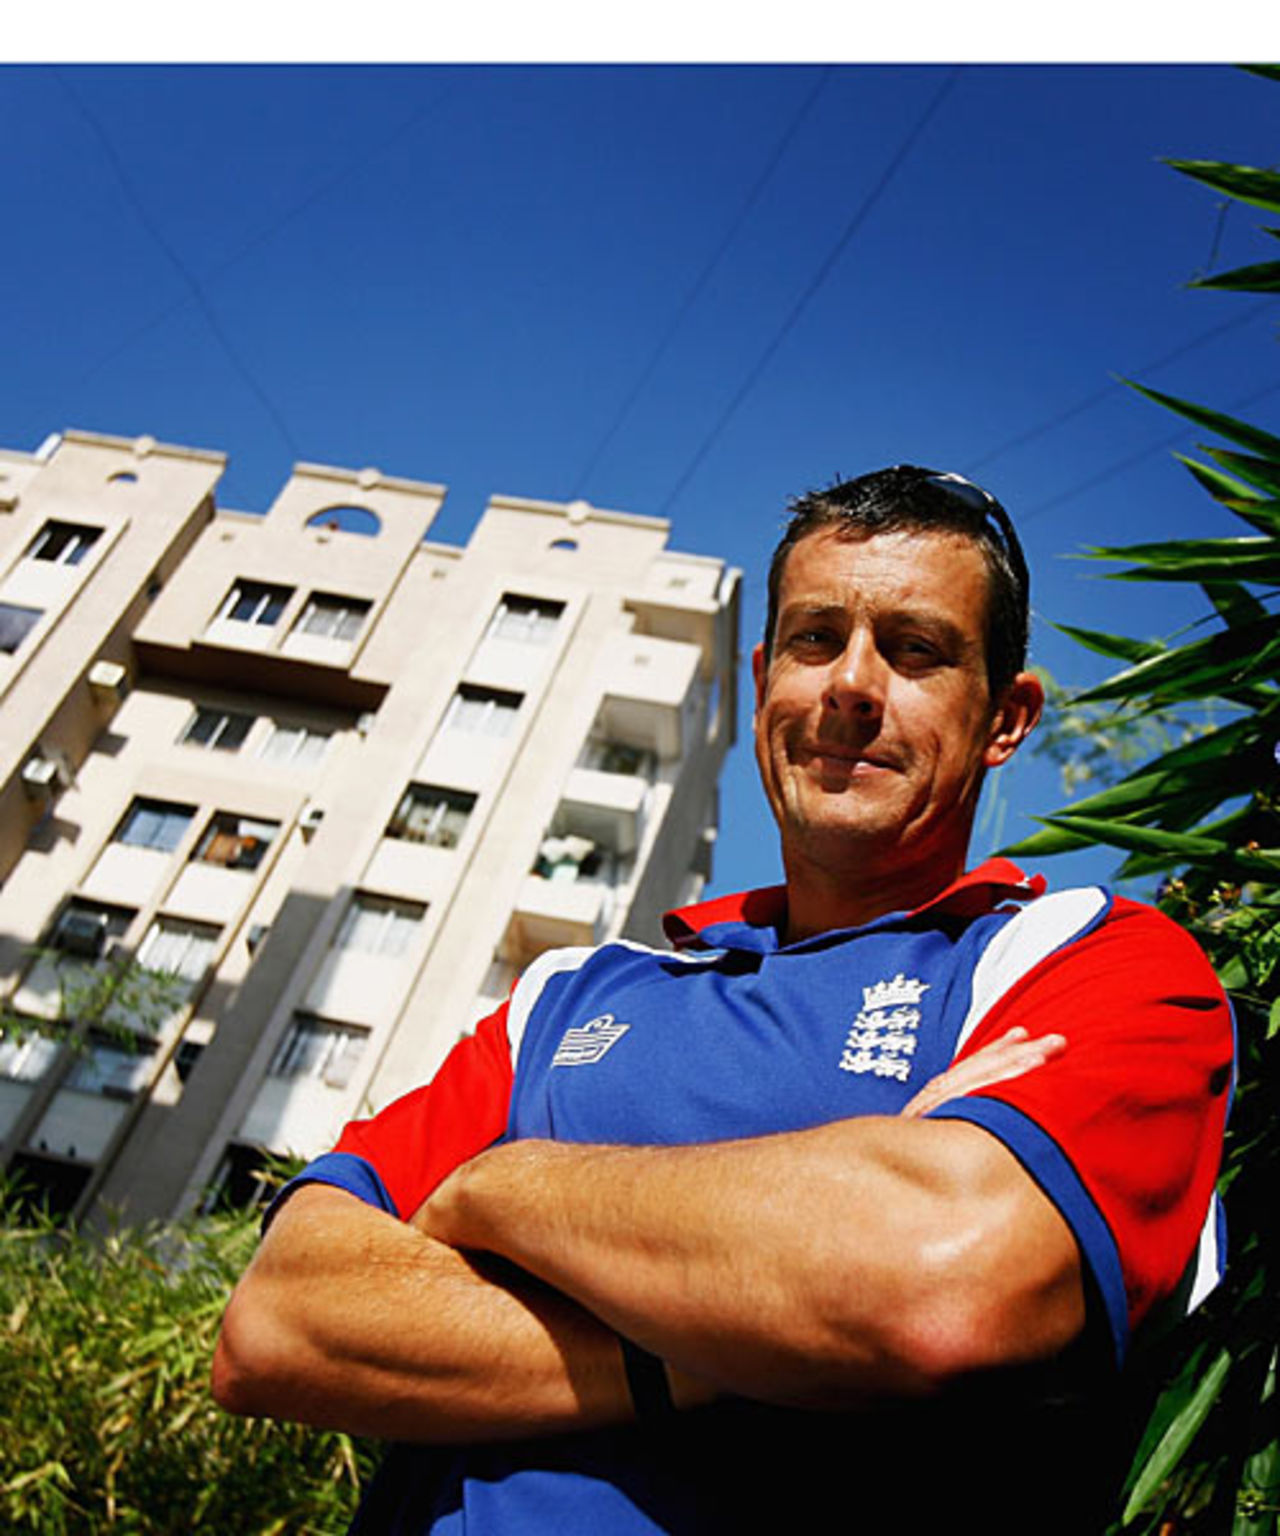 Ashley Giles speaks to the media, Ahmedabad, October 24, 2006